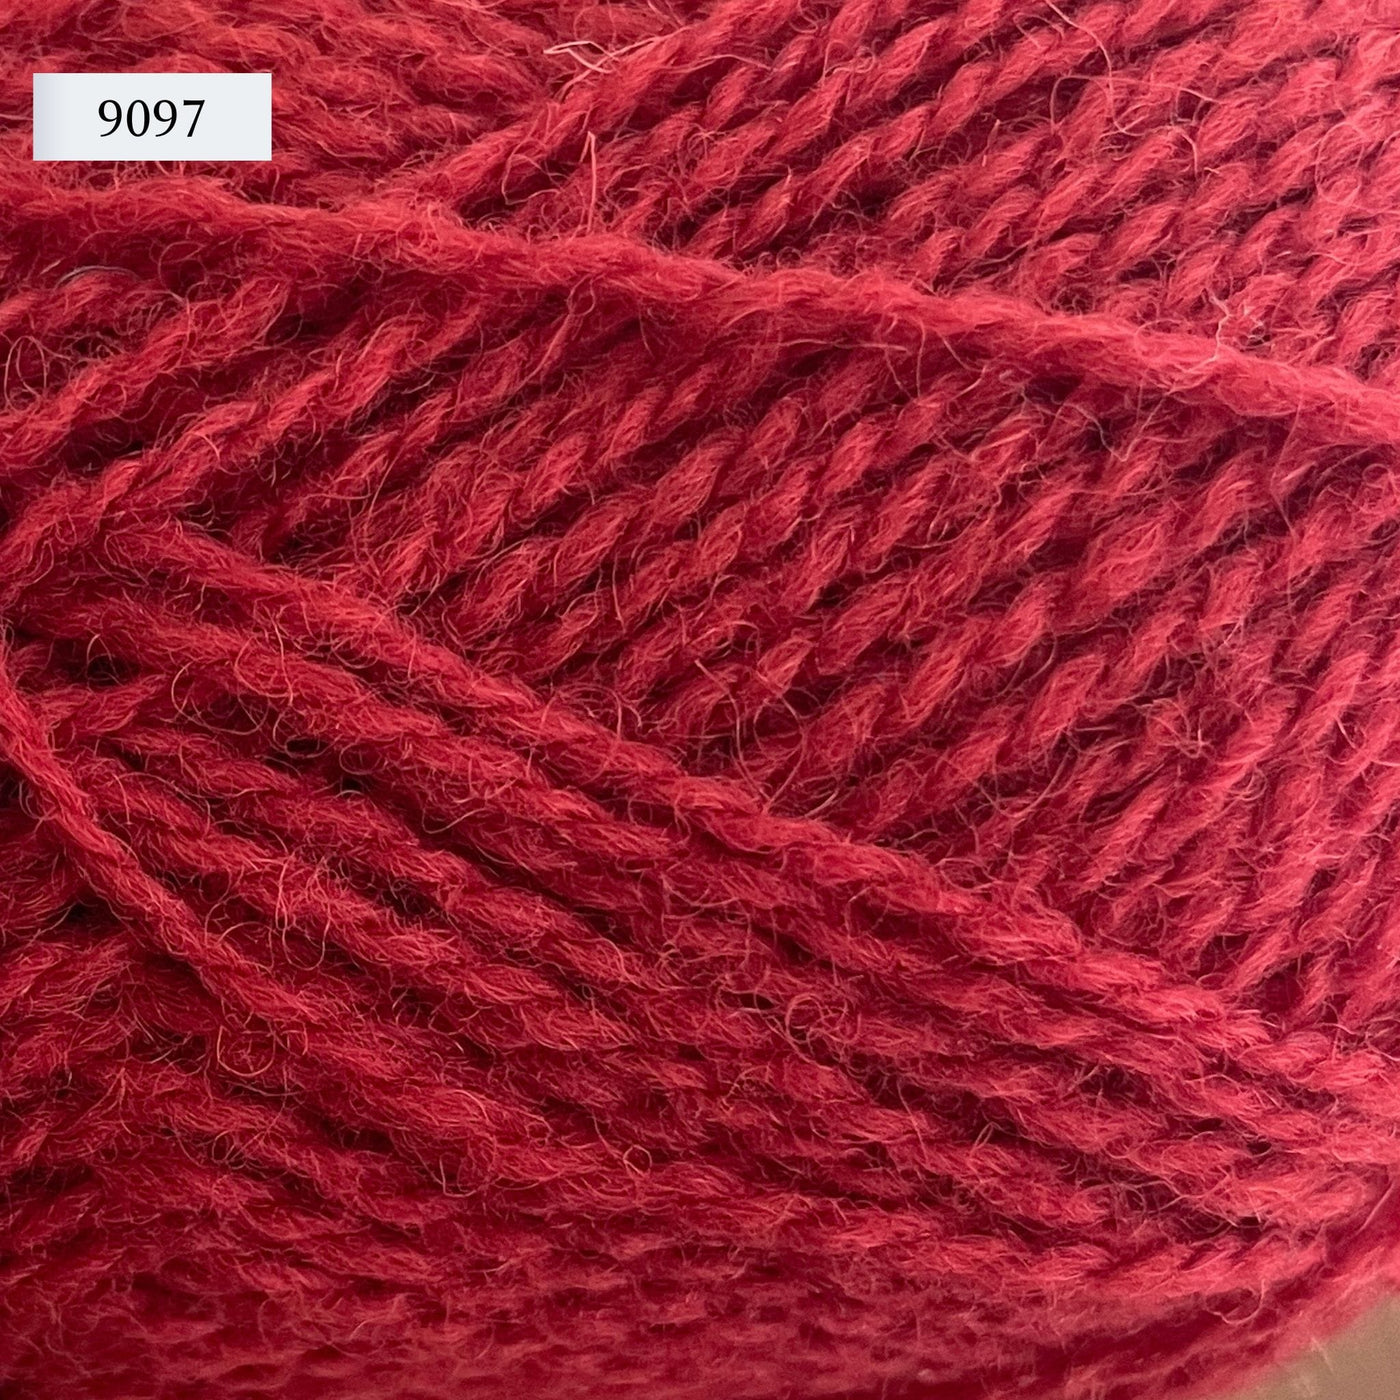 Jamieson & Smith 2ply Jumper Weight, light fingering weight yarn, in color 9097, brick red